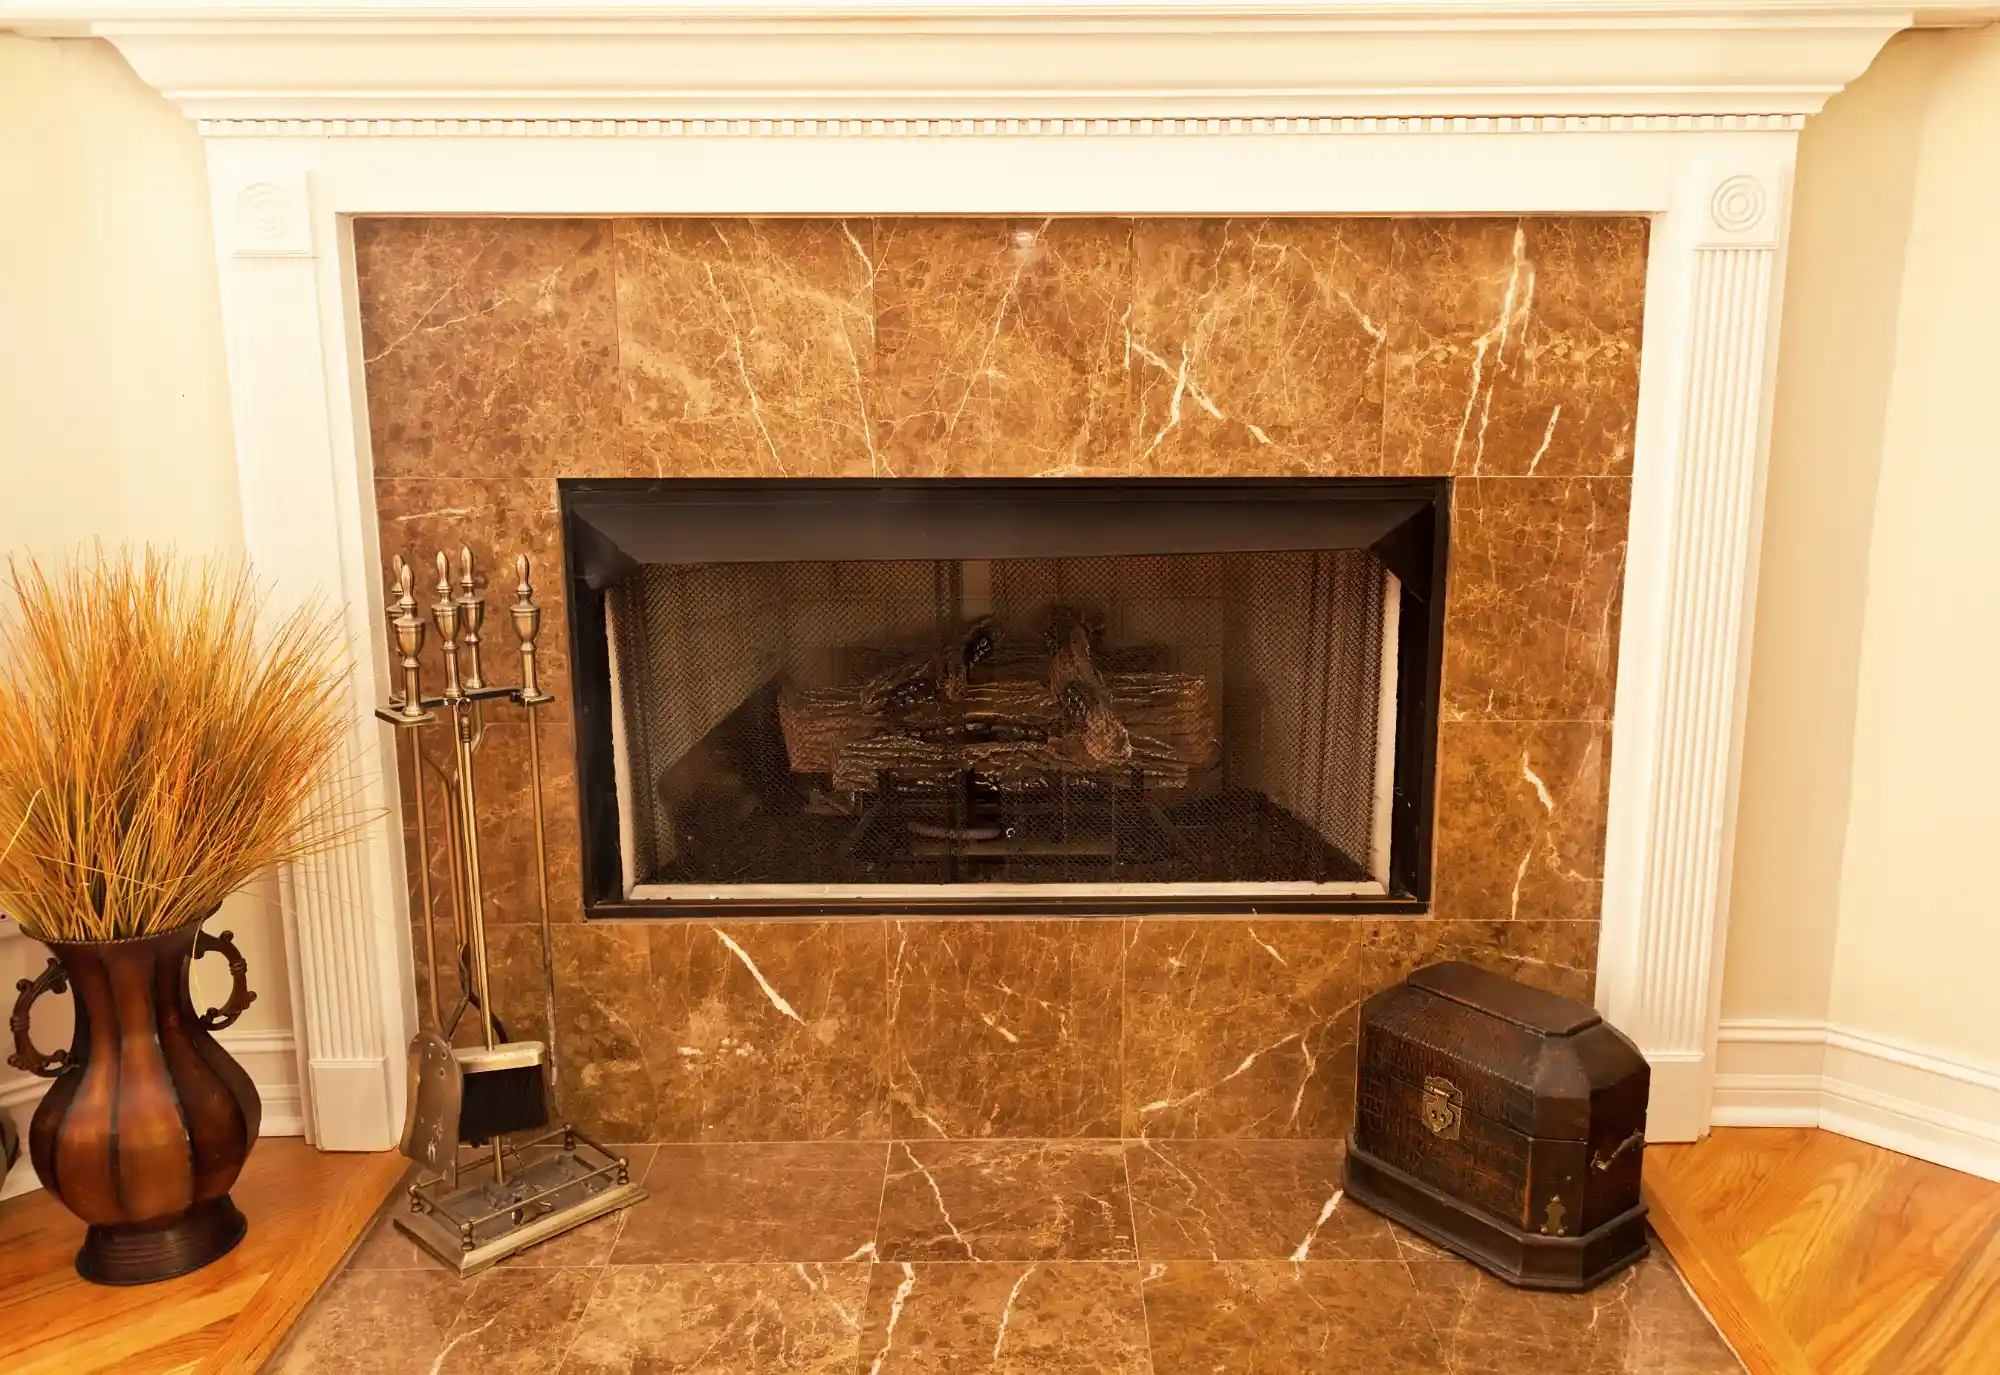 Custom tiled fireplace with brown eco friendly tile